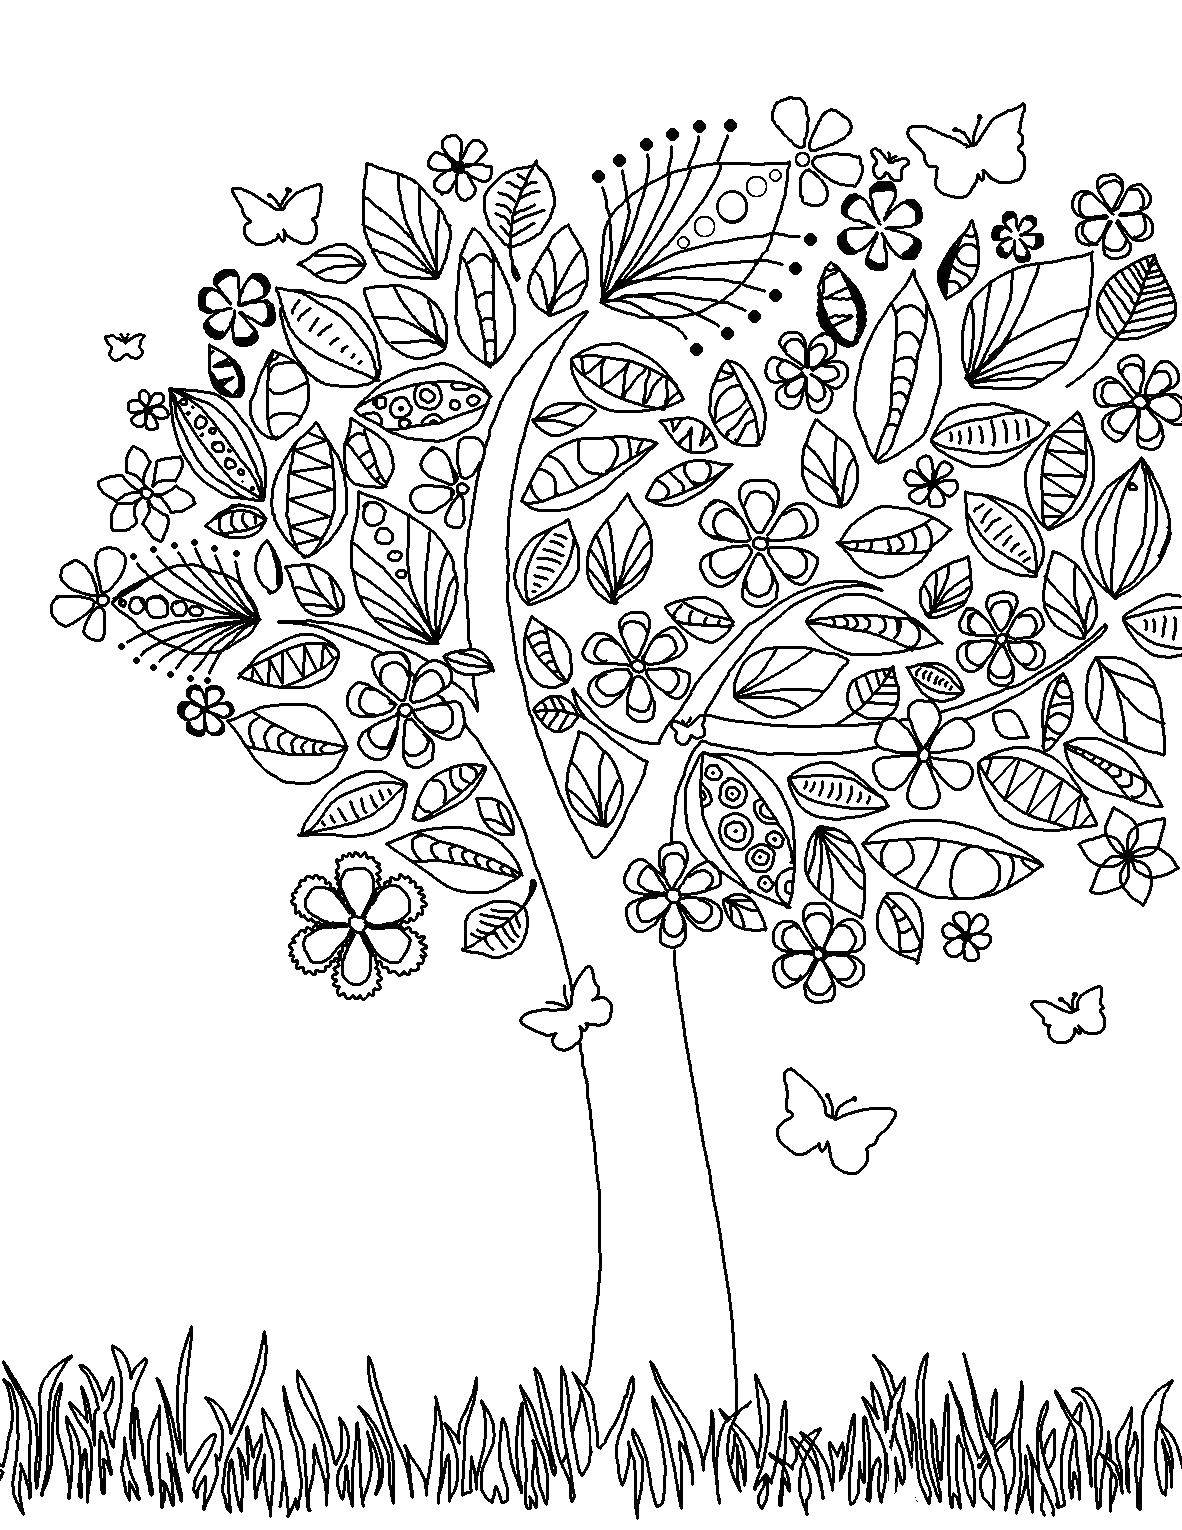 Coloring Tree with patterned leaves. Category coloring antistress. Tags:  the antistress, patterns, shapes.